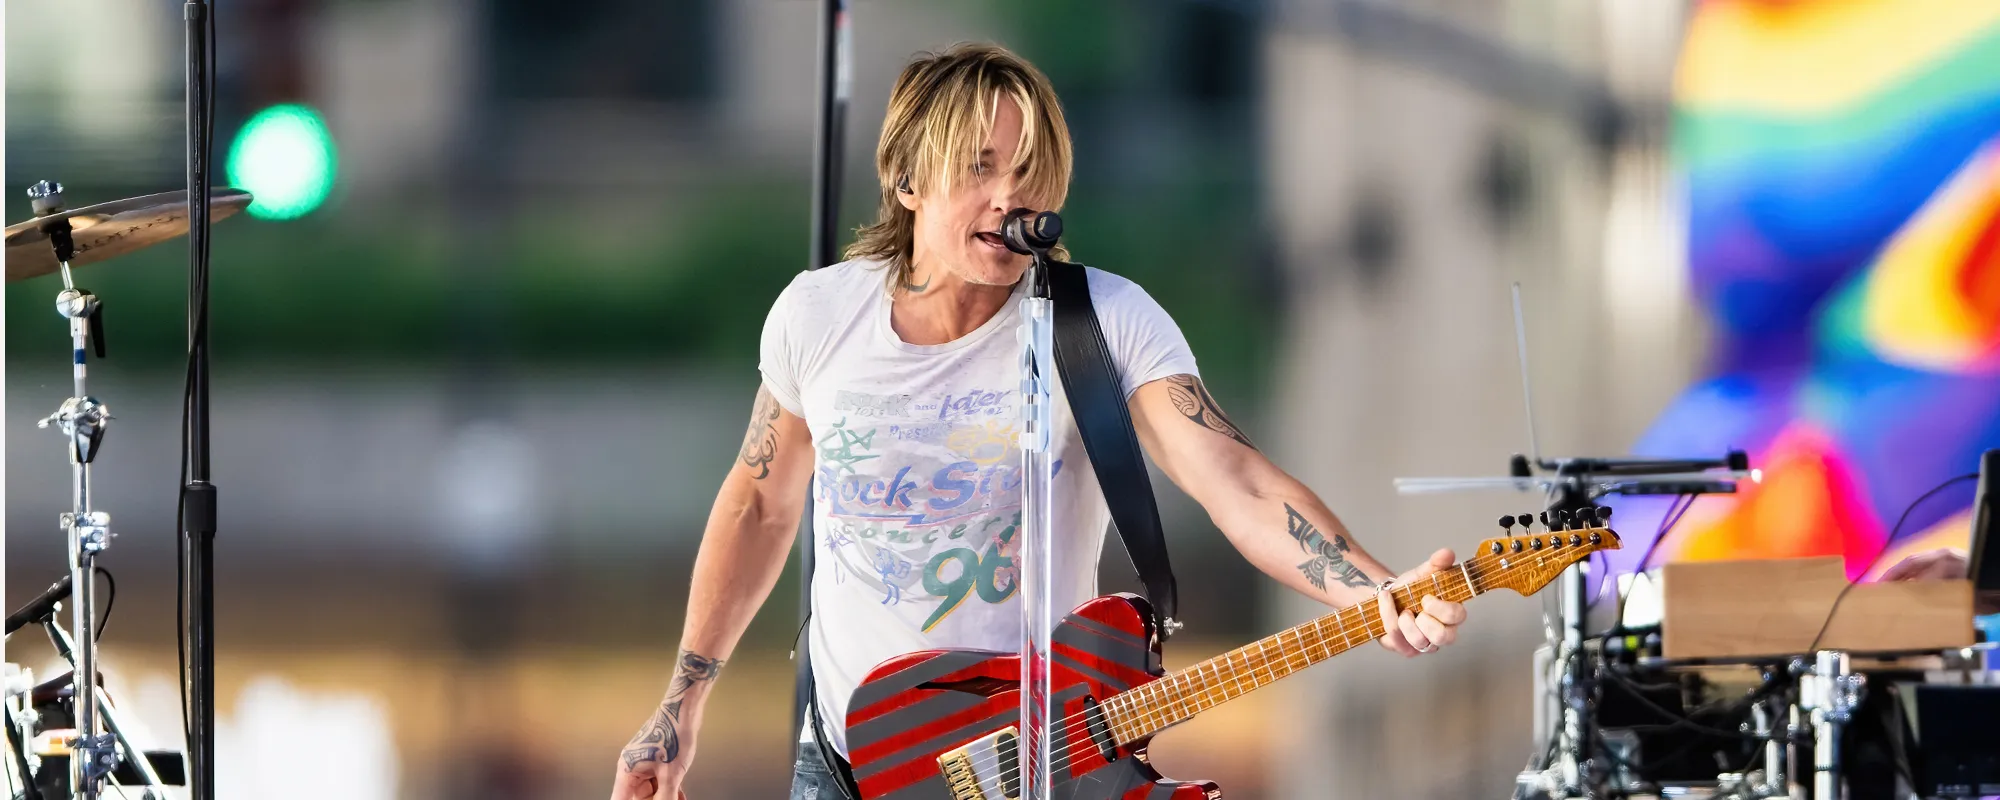 Keith Urban, The Chicks’ Martie Maguire Nominated for Nashville Songwriters Hall of Fame